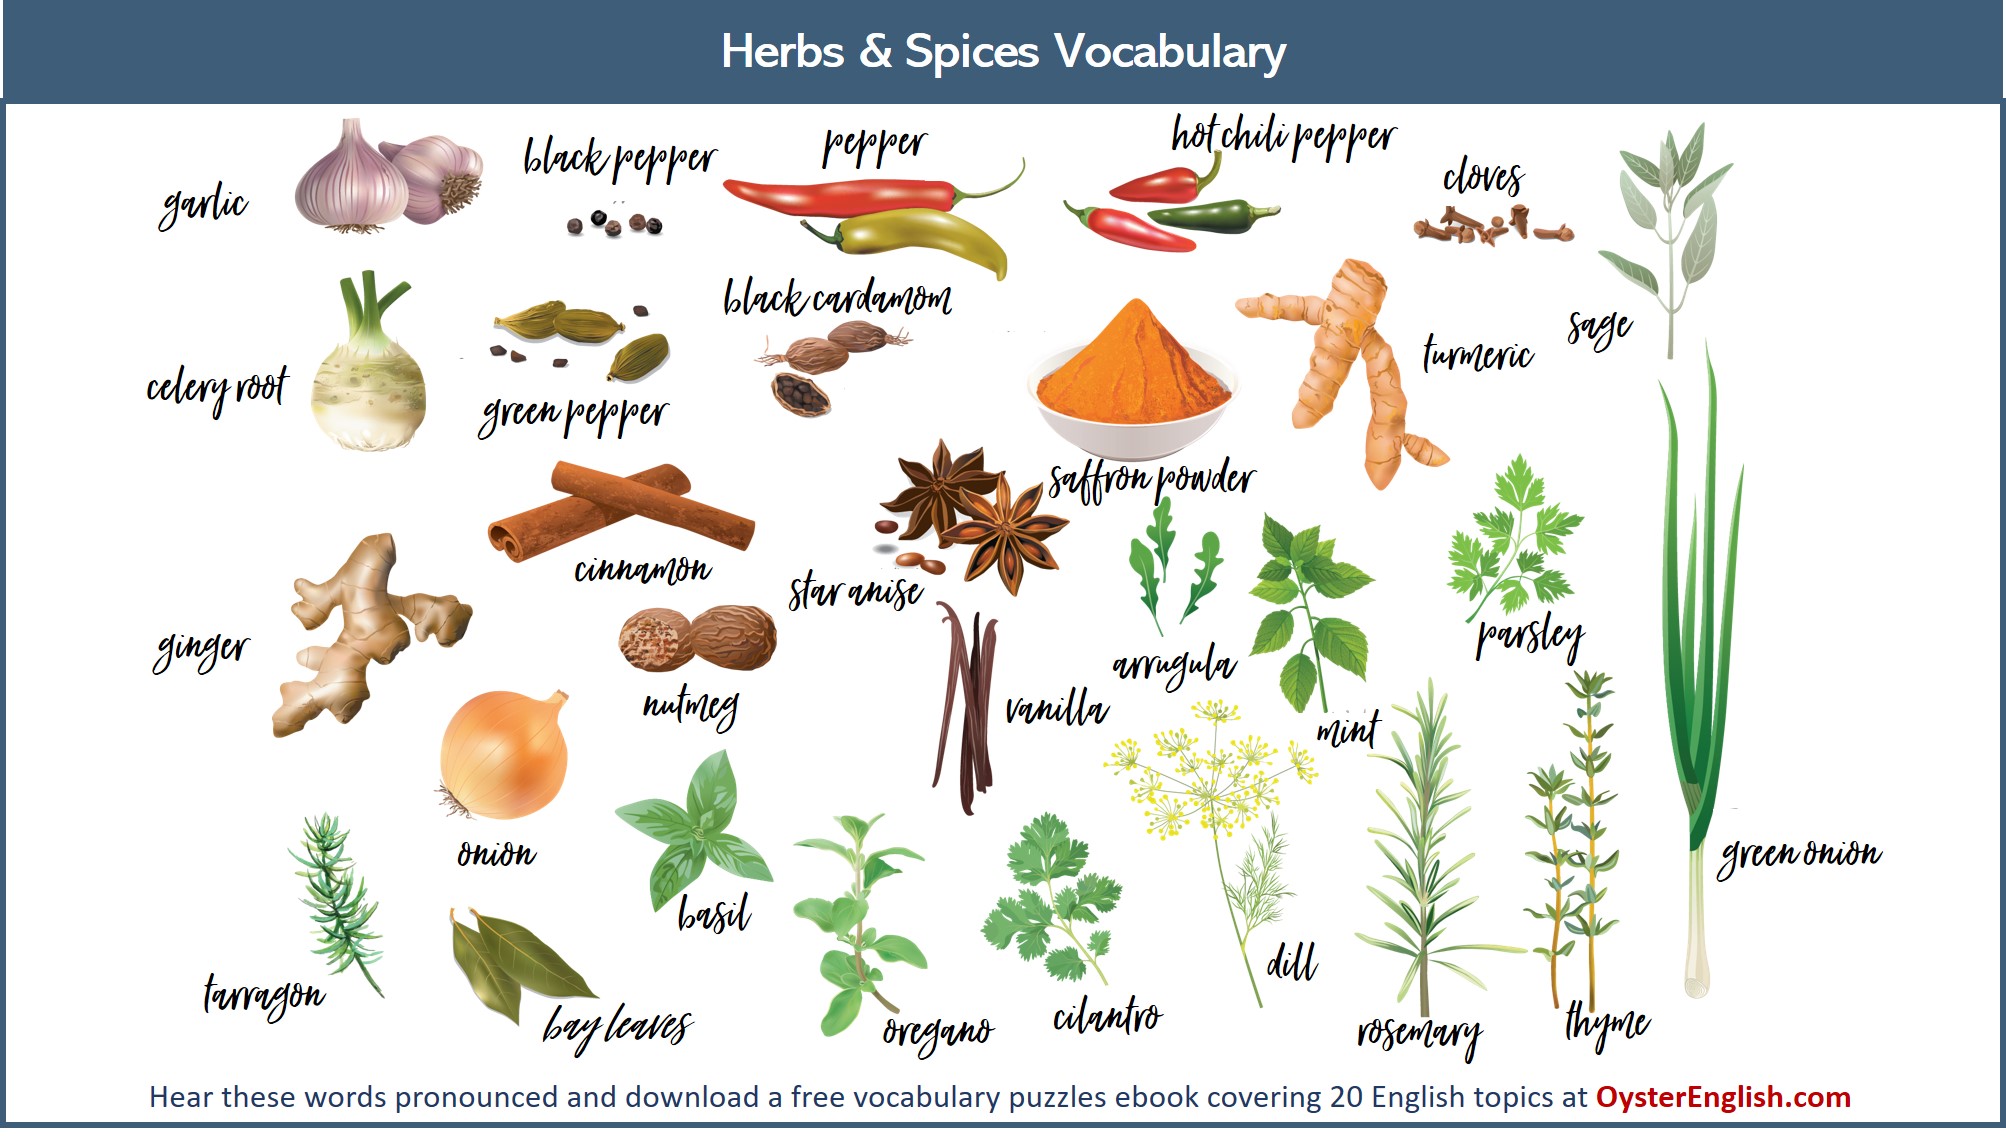 A collection of the illustration of the herbs and spices listed on this page.